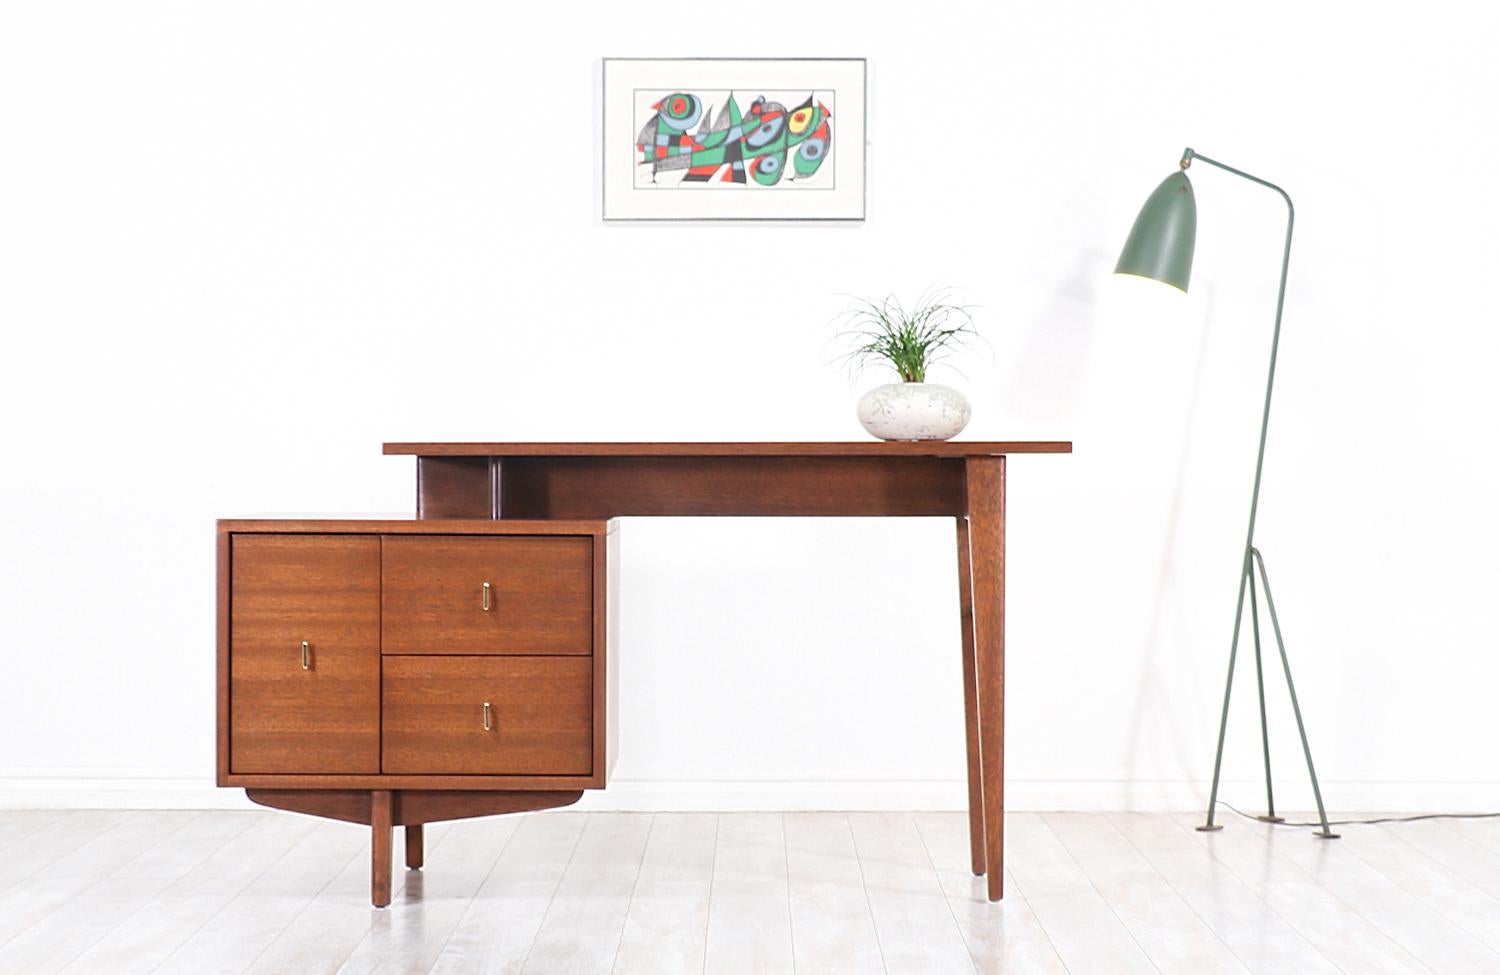 Sleek modern writing desk designed by John Keal for Brown Saltman in the United States, circa 1960s. The asymmetrical shape on this striking desk exemplifies Keal’s clean and modern aesthetic ideal to represent Classic Minimalist expressions for a